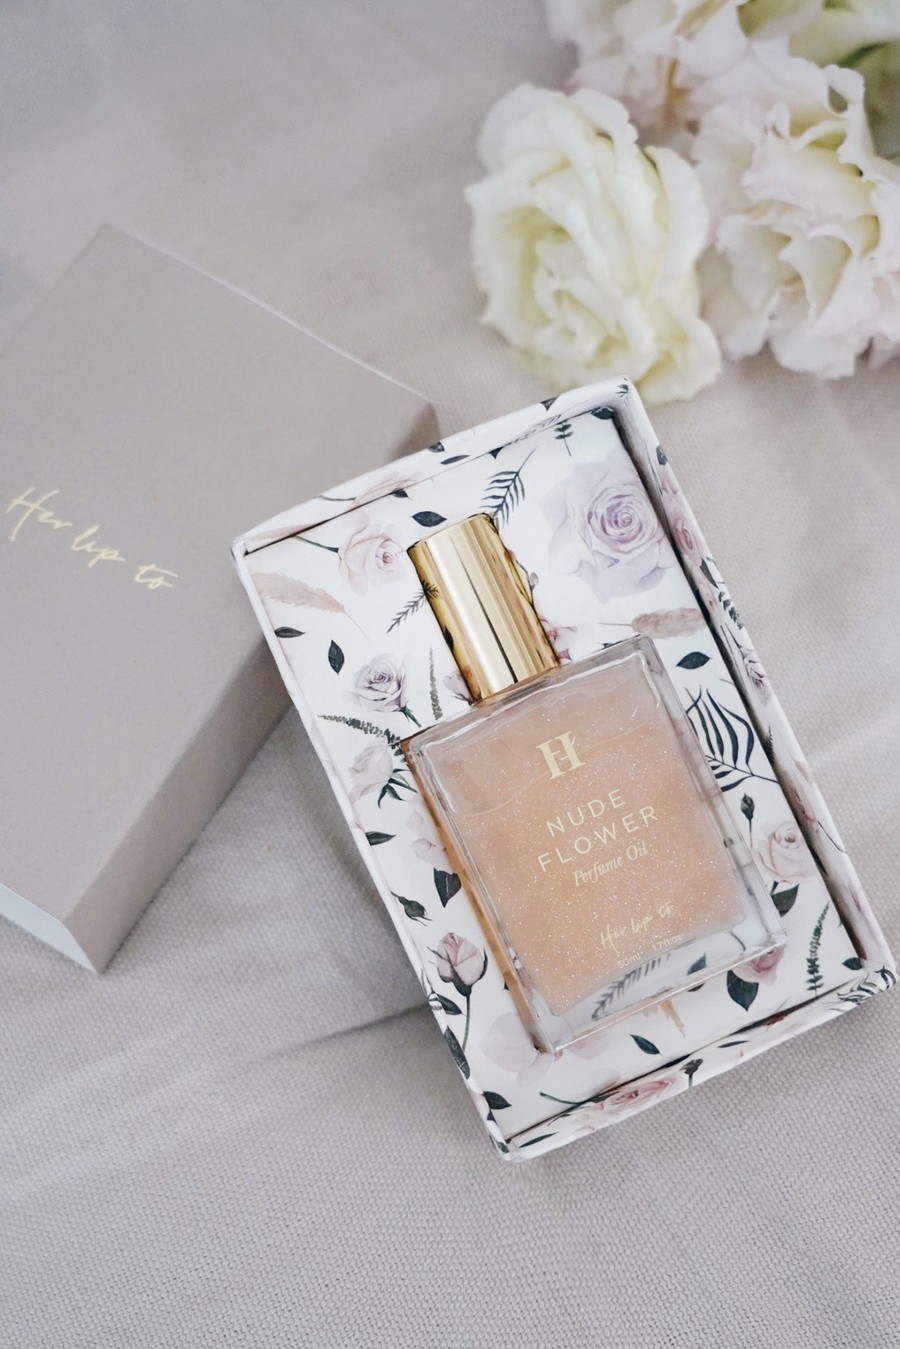 PERFUME OIL by HLT -NUDE FLOWER- | Her lip to